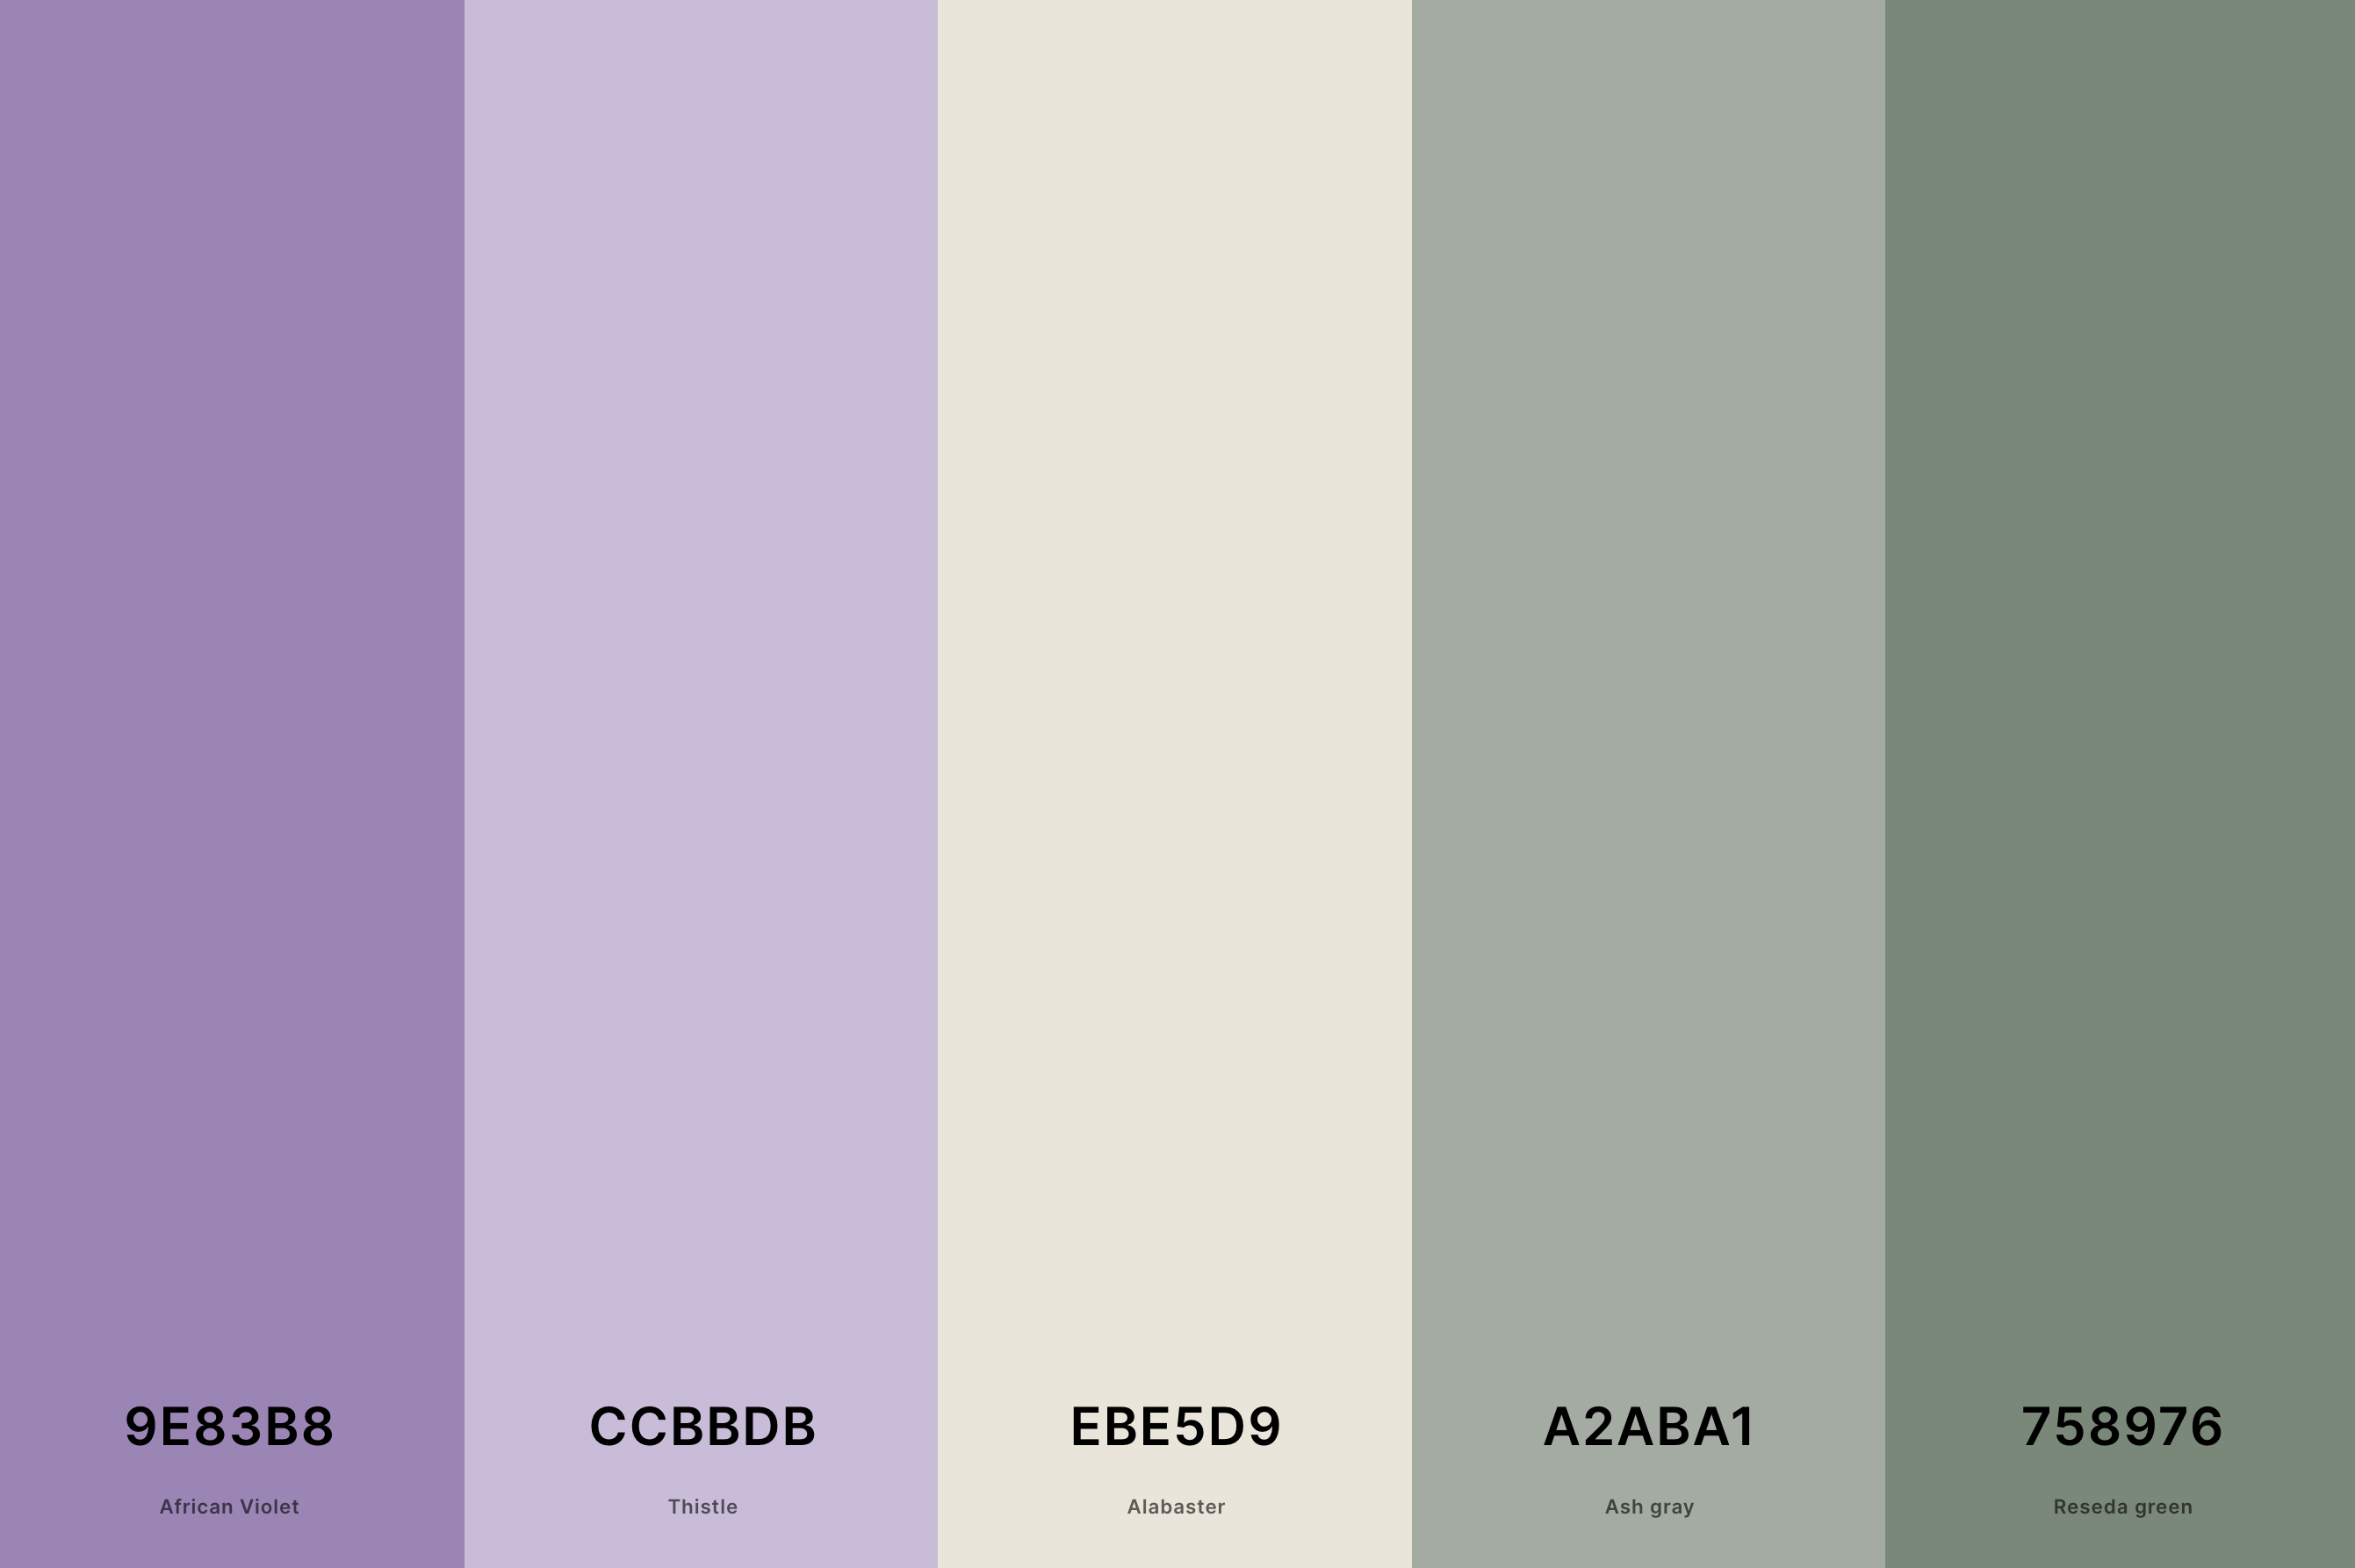 18. Sage Green And Purple Color Palette Color Palette with African Violet (Hex #9E83B8) + Thistle (Hex #CCBBDB) + Alabaster (Hex #EBE5D9) + Ash Gray (Hex #A2ABA1) + Reseda Green (Hex #758976) Color Palette with Hex Codes